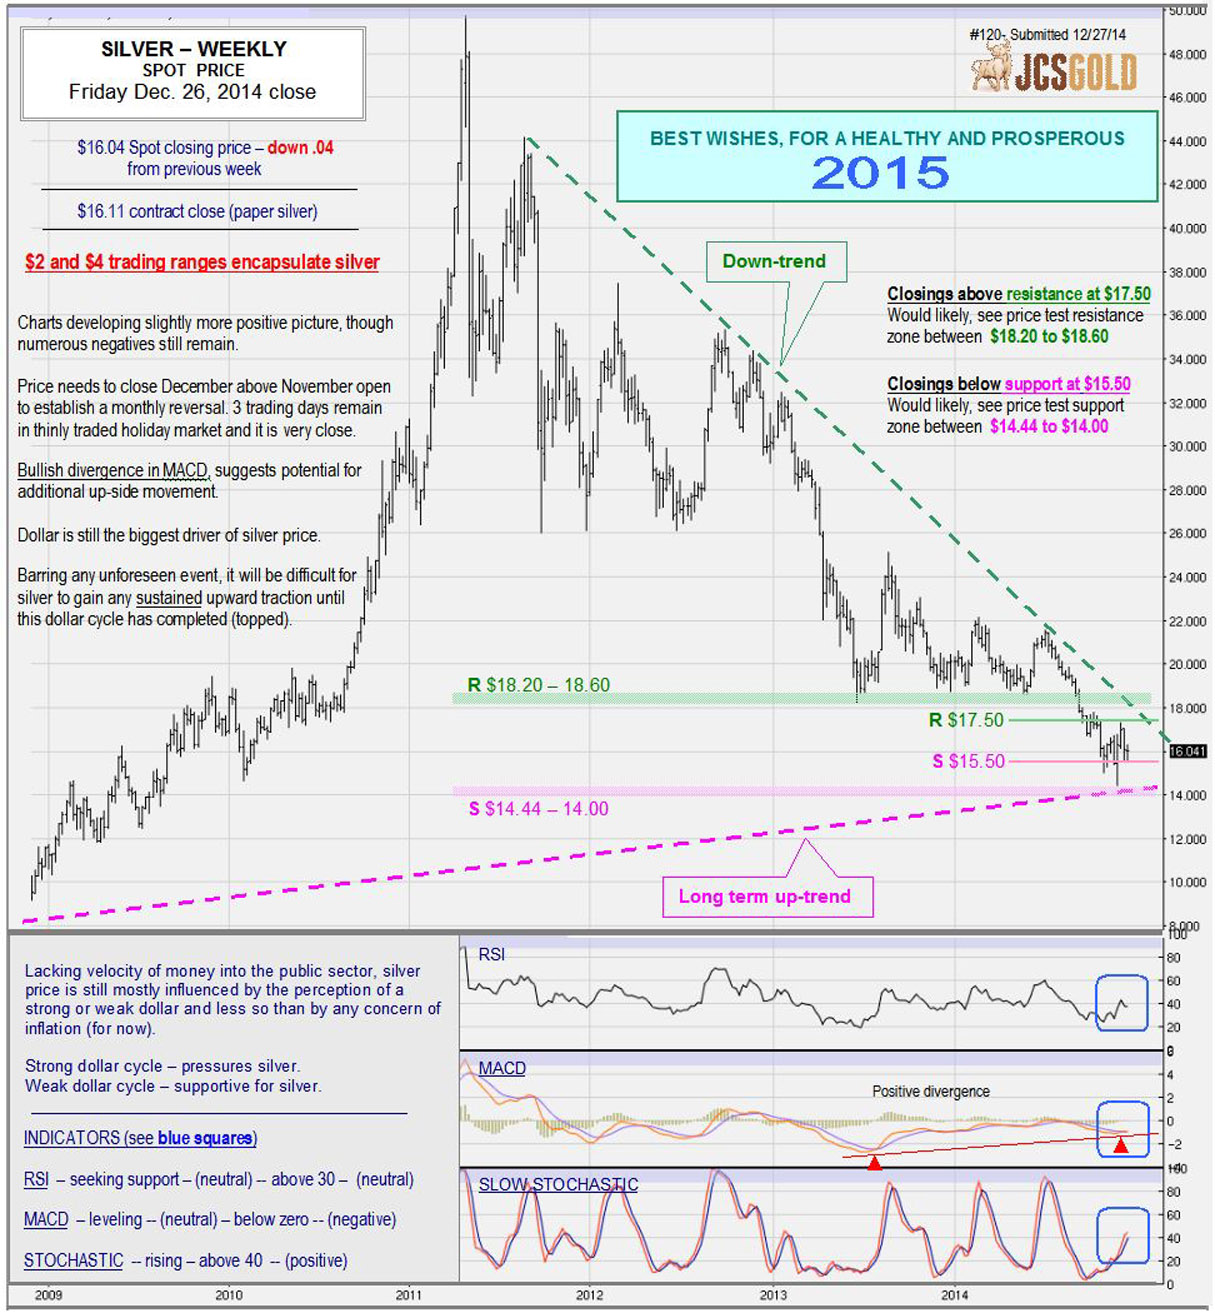 Dec 26, 2014 chart & commentary